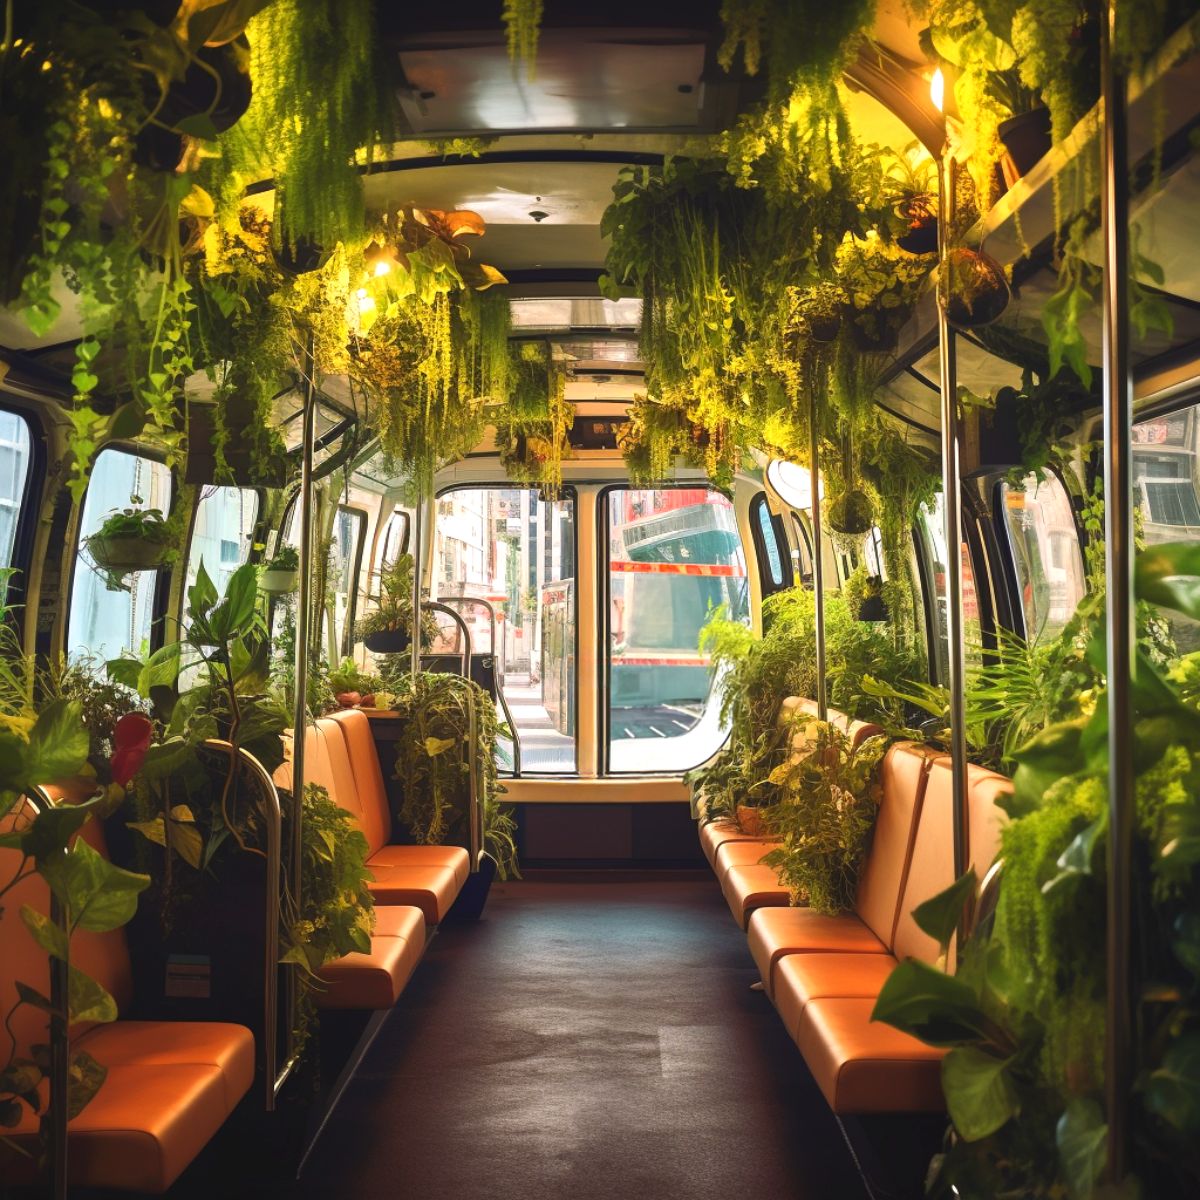 Inside of greenhouse buses